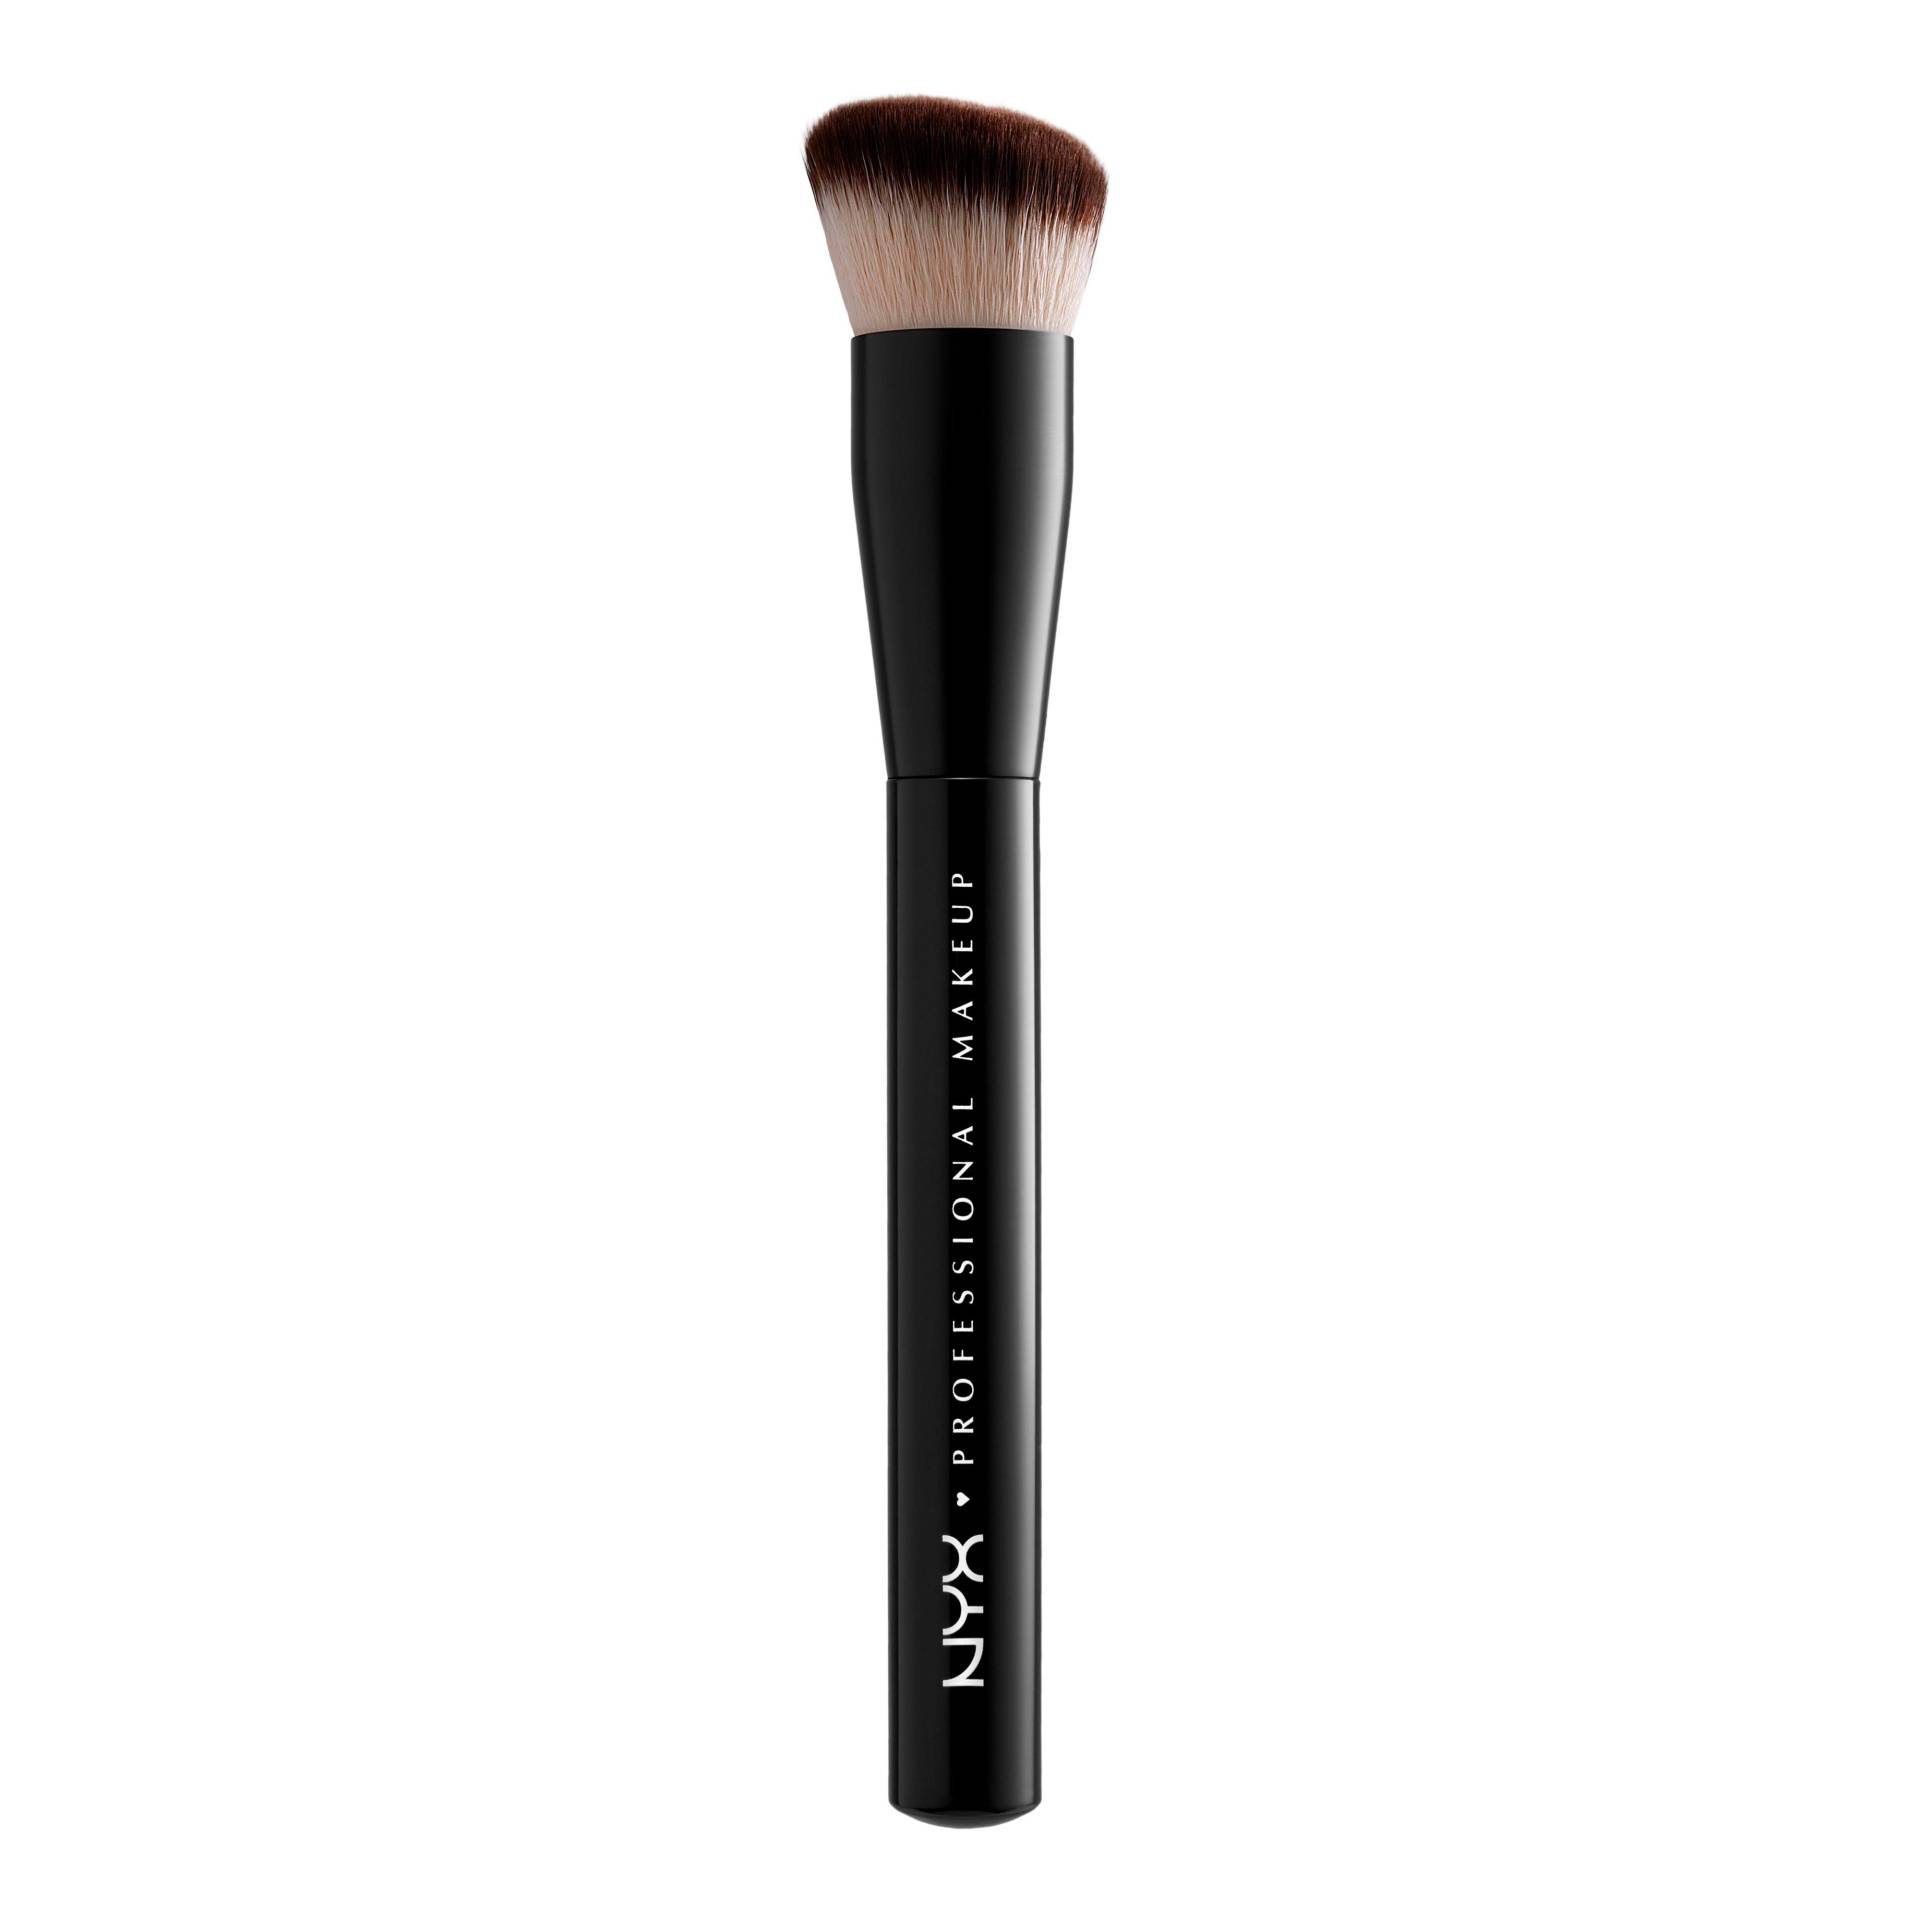 Foundation Brush - Can't Stop Won't Stop Damen Multicolor ONE SIZE von NYX-PROFESSIONAL-MAKEUP